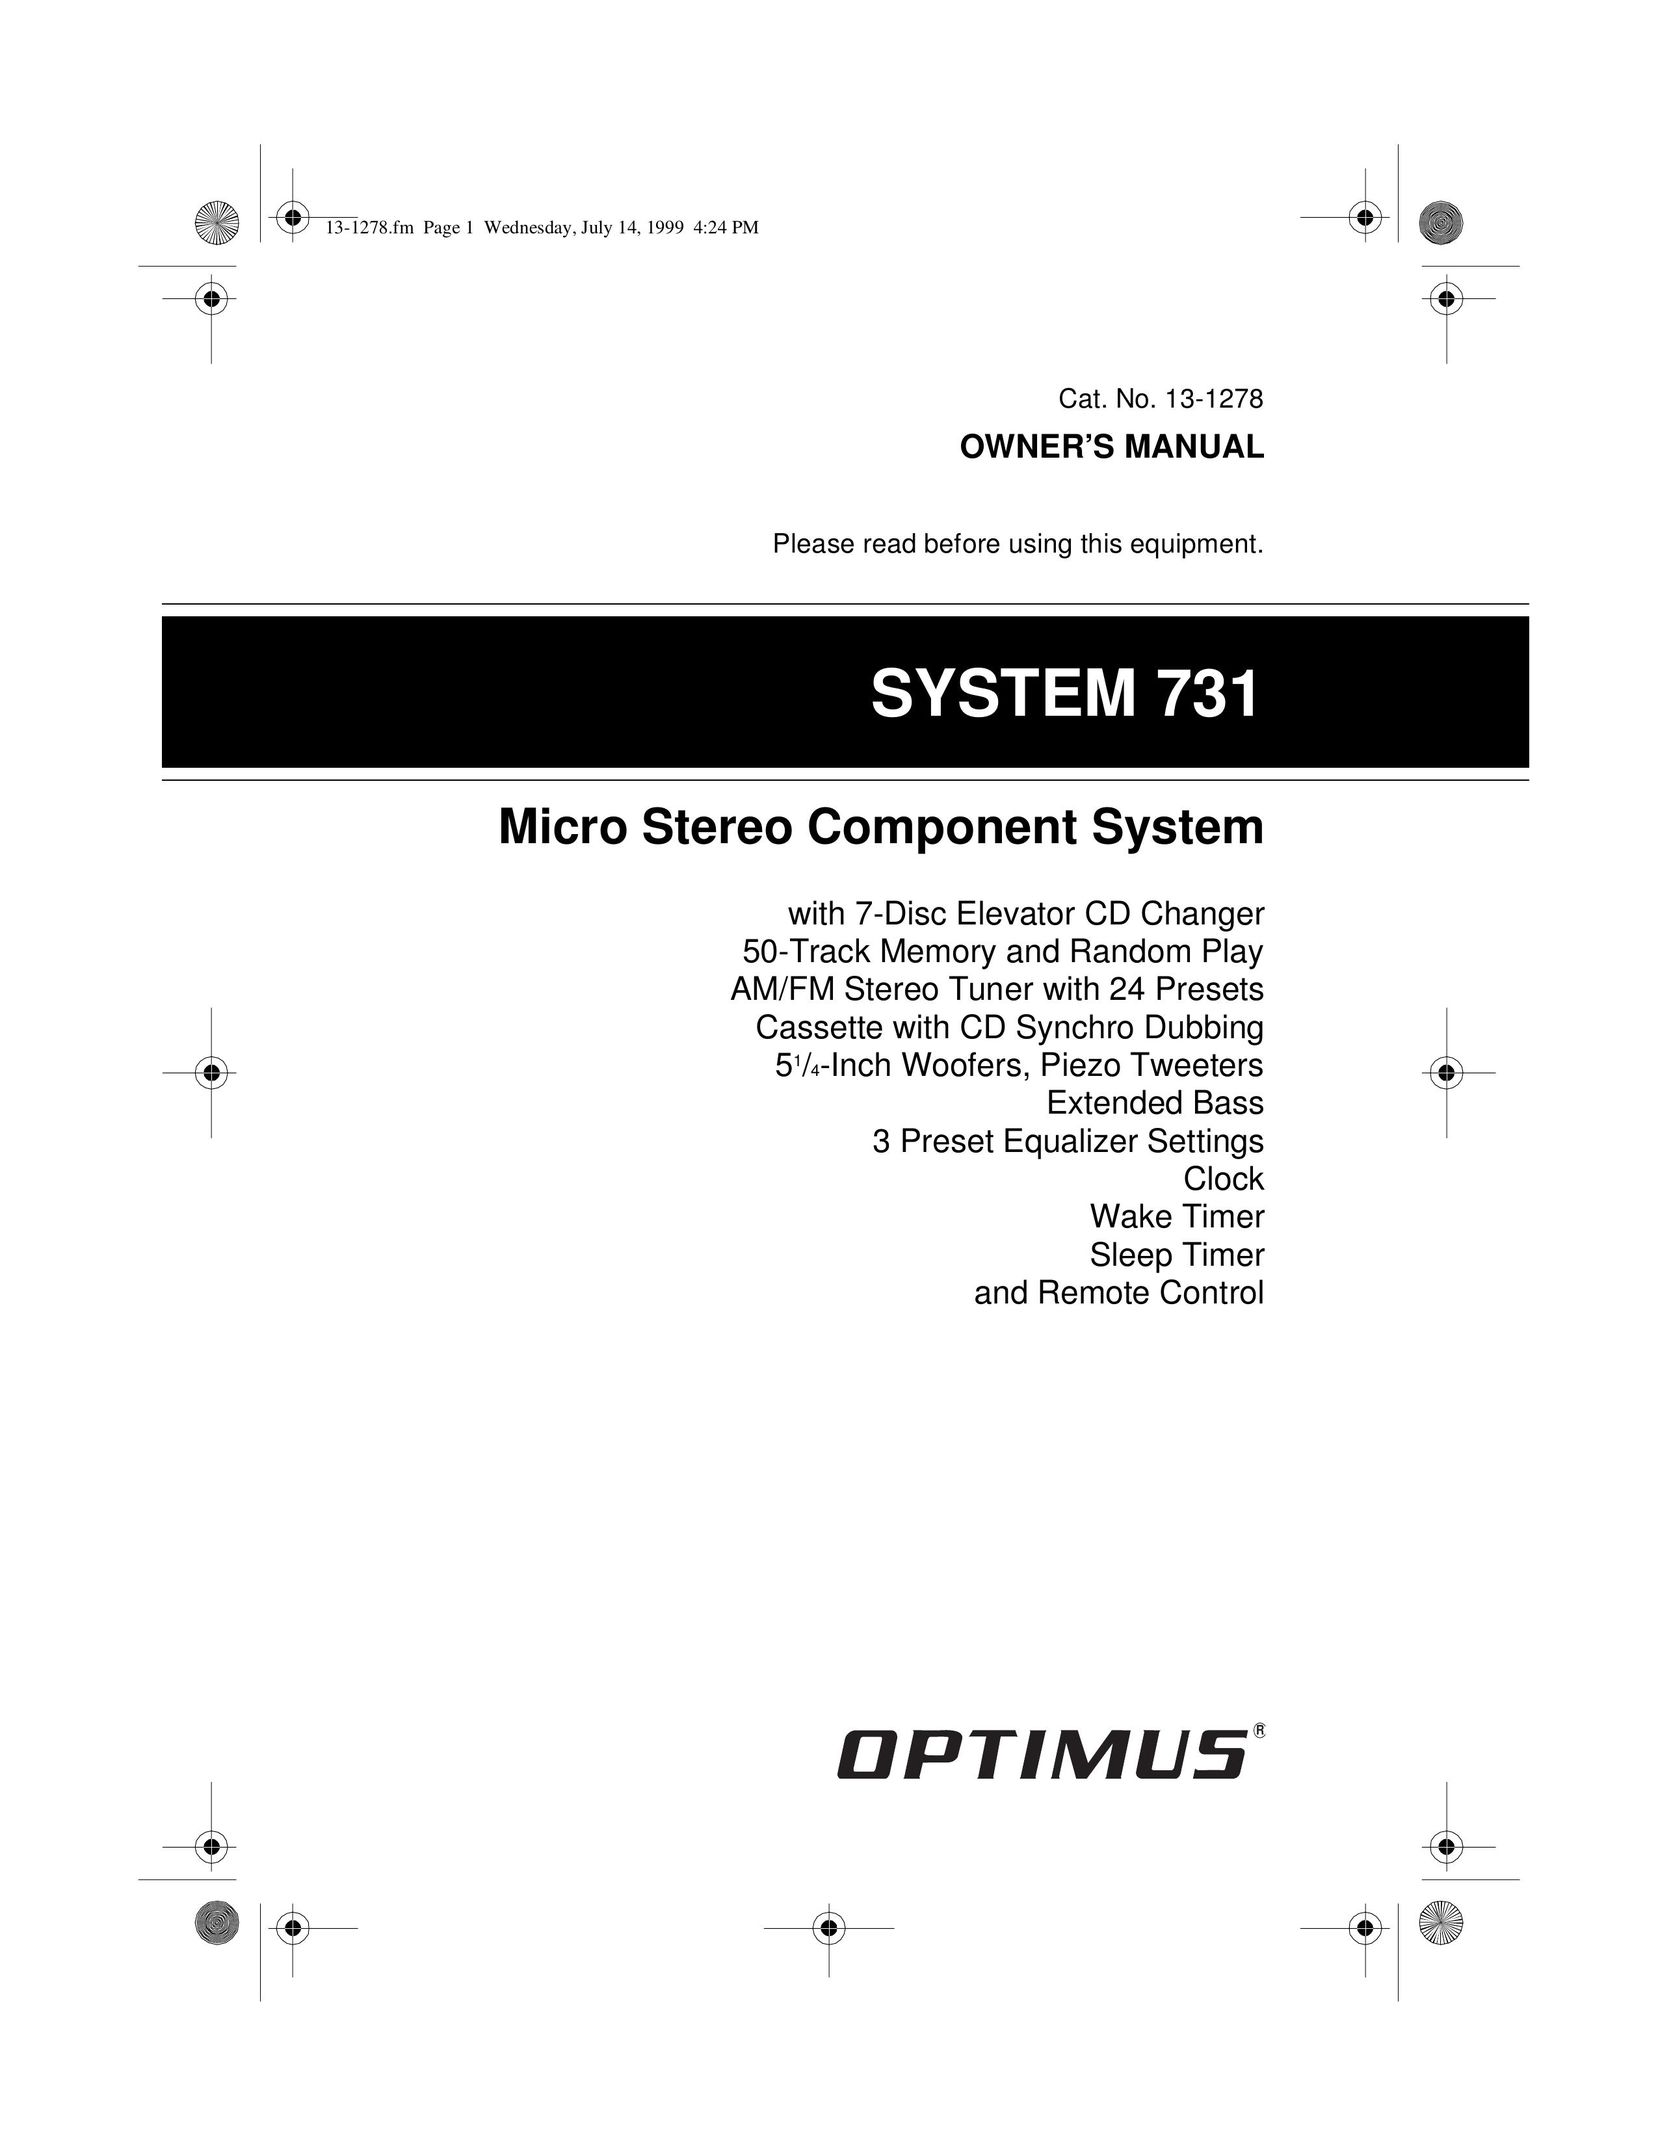 Optimus 731 Home Theater System User Manual